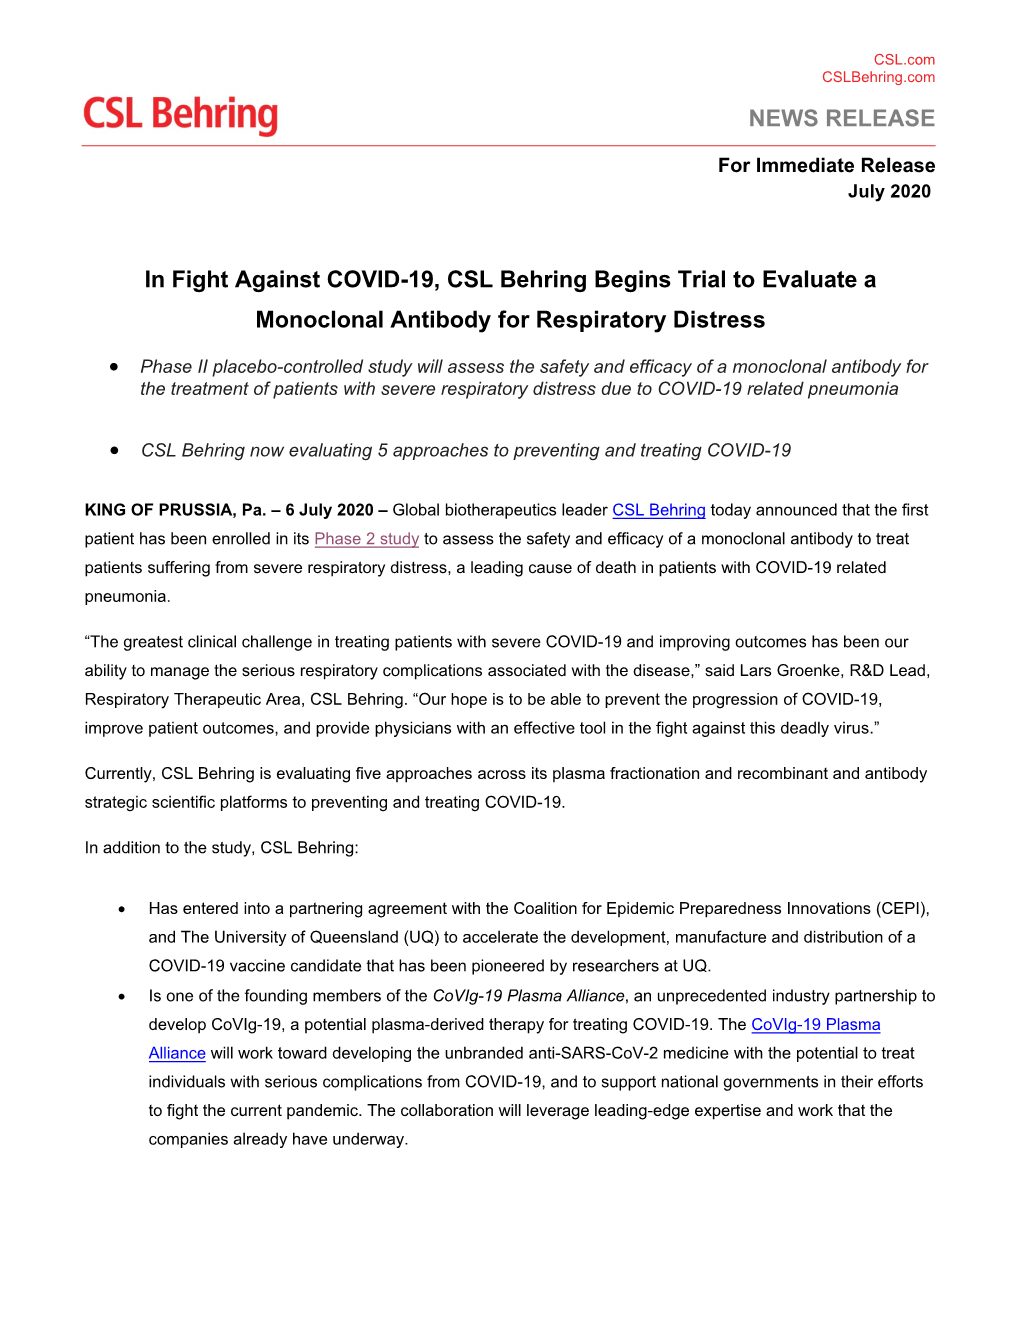 NEWS RELEASE in Fight Against COVID-19, CSL Behring Begins Trial to Evaluate a Monoclonal Antibody for Respiratory Distress